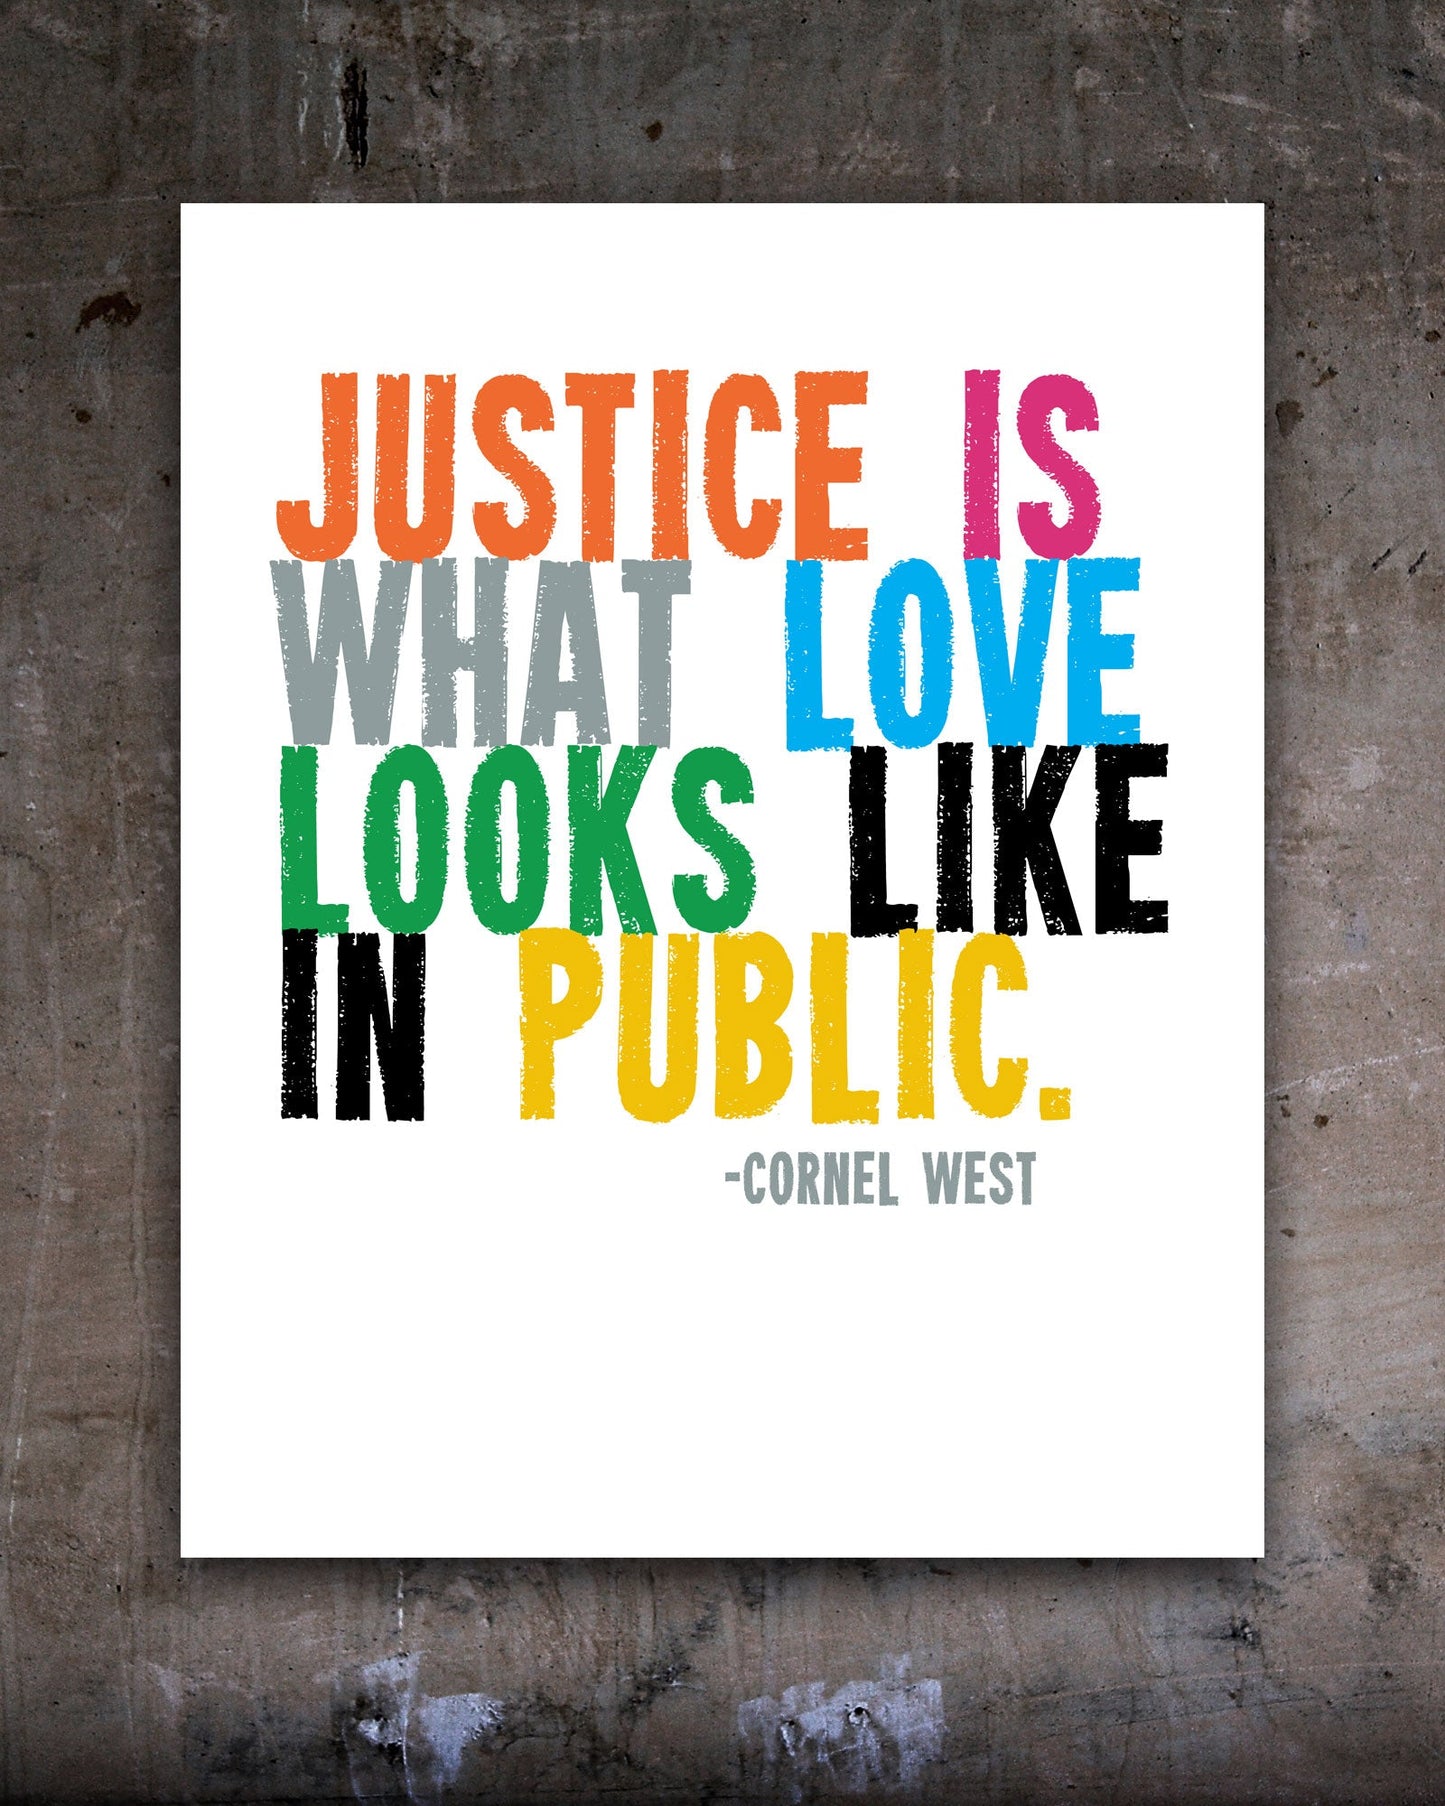 Justice is What Love Looks Like Social Justice Poster, Cornel West quote - Transit Design